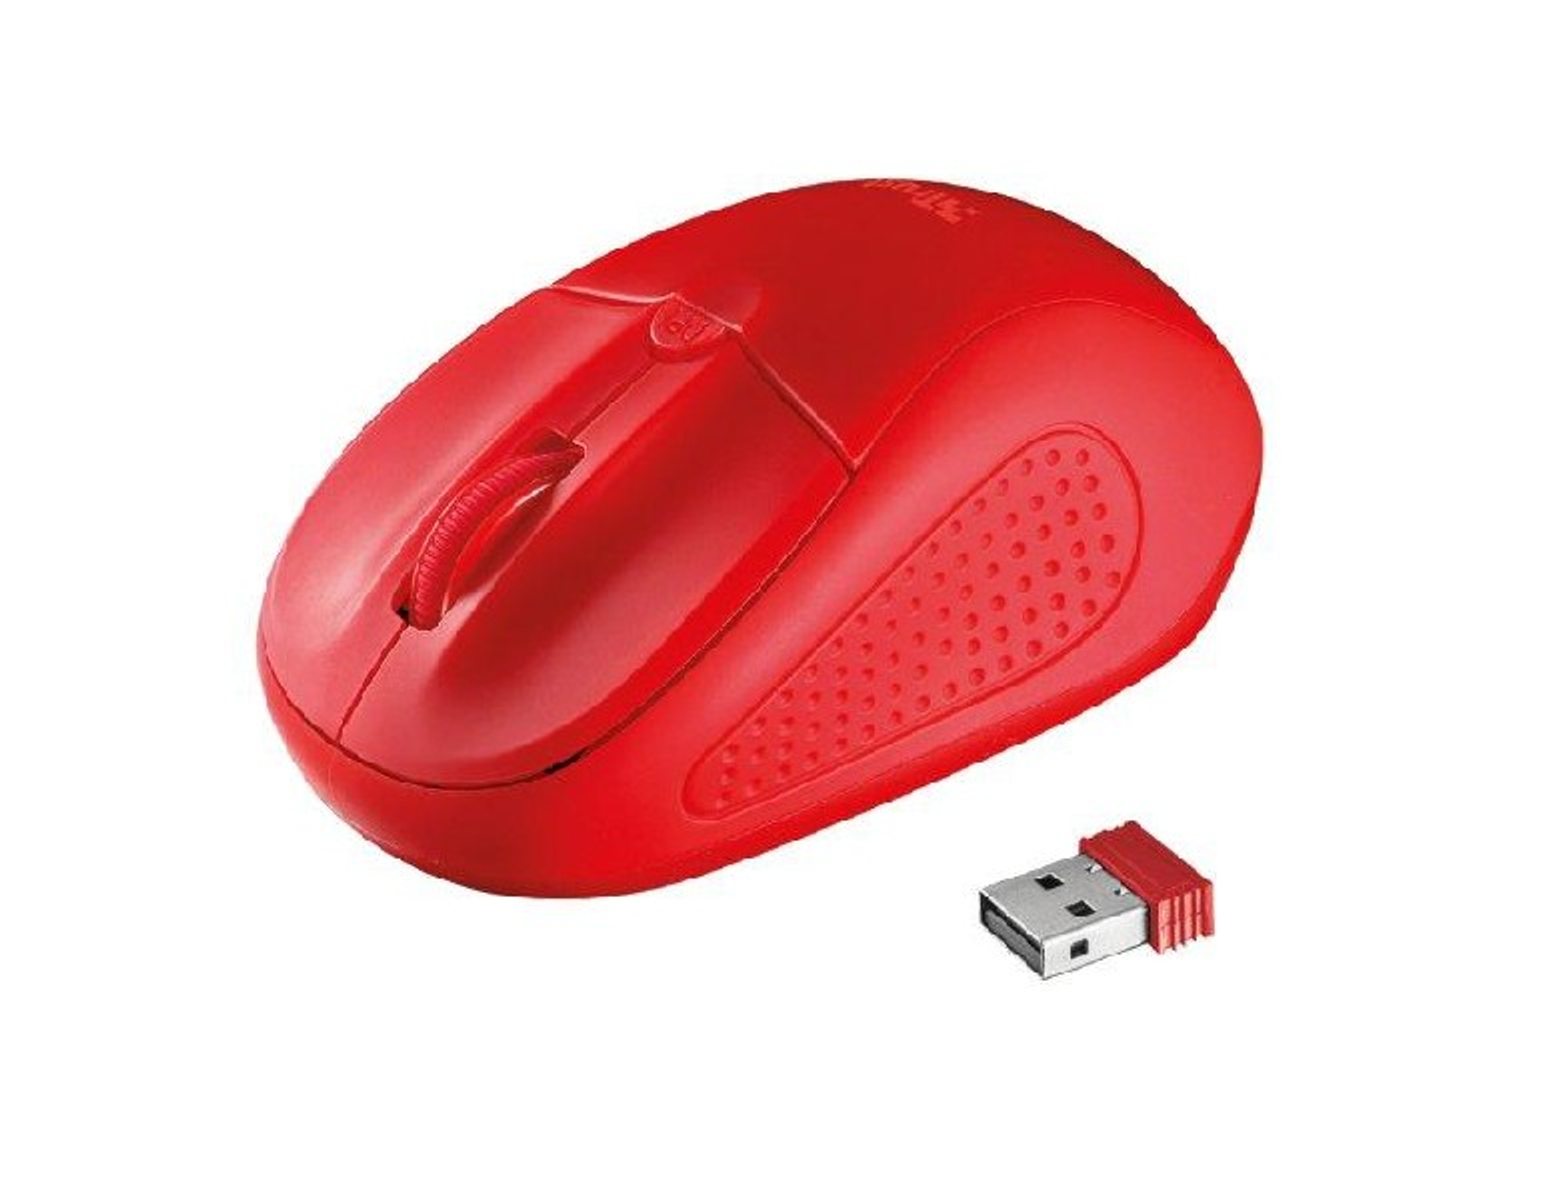 TRUST 20787 PRIMO Funkmaus, WLS RED MSE Rot